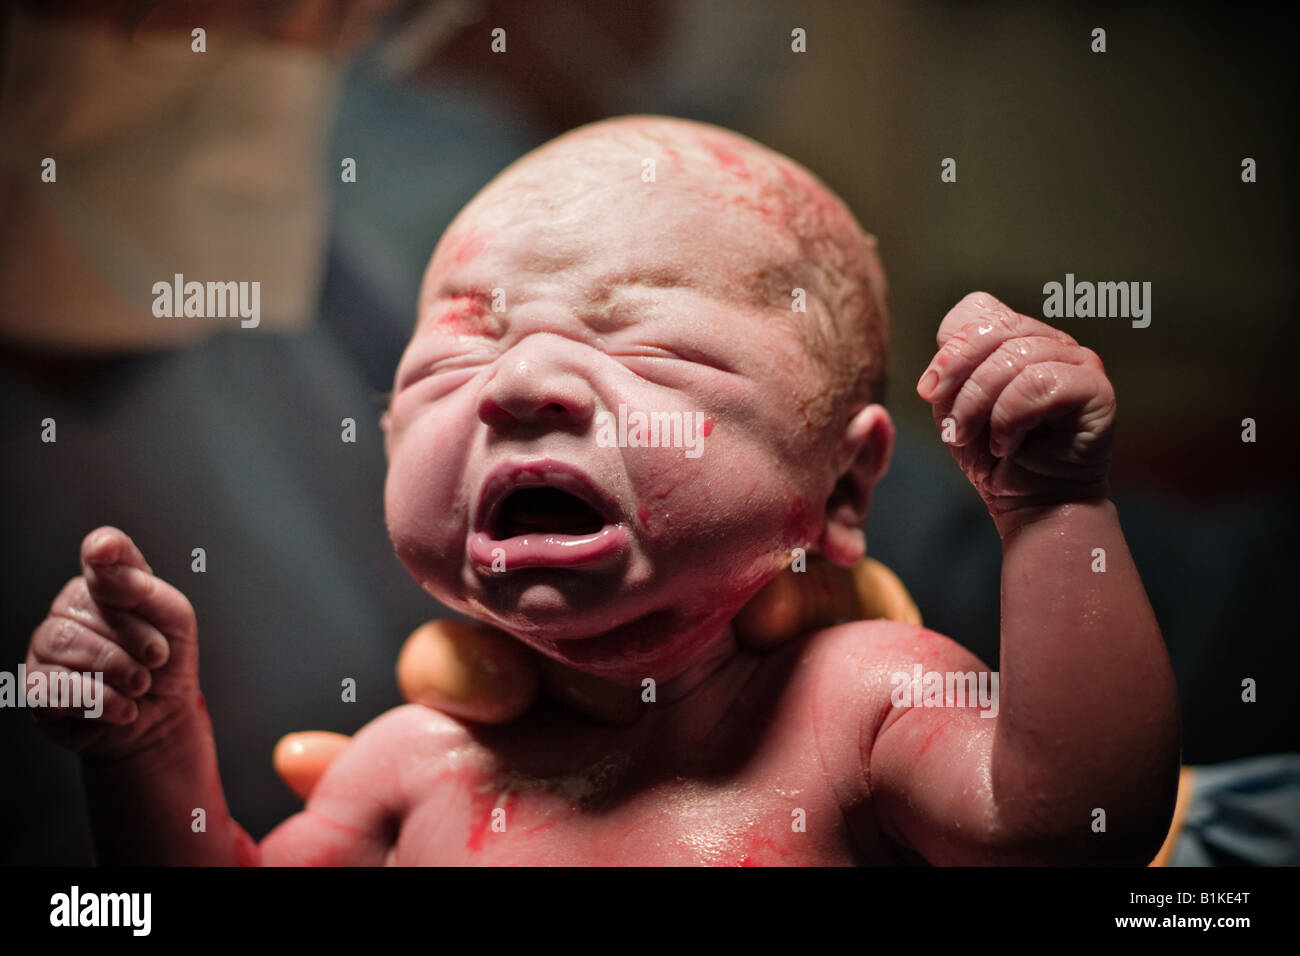 Baby delivered only seconds before Stock Photo